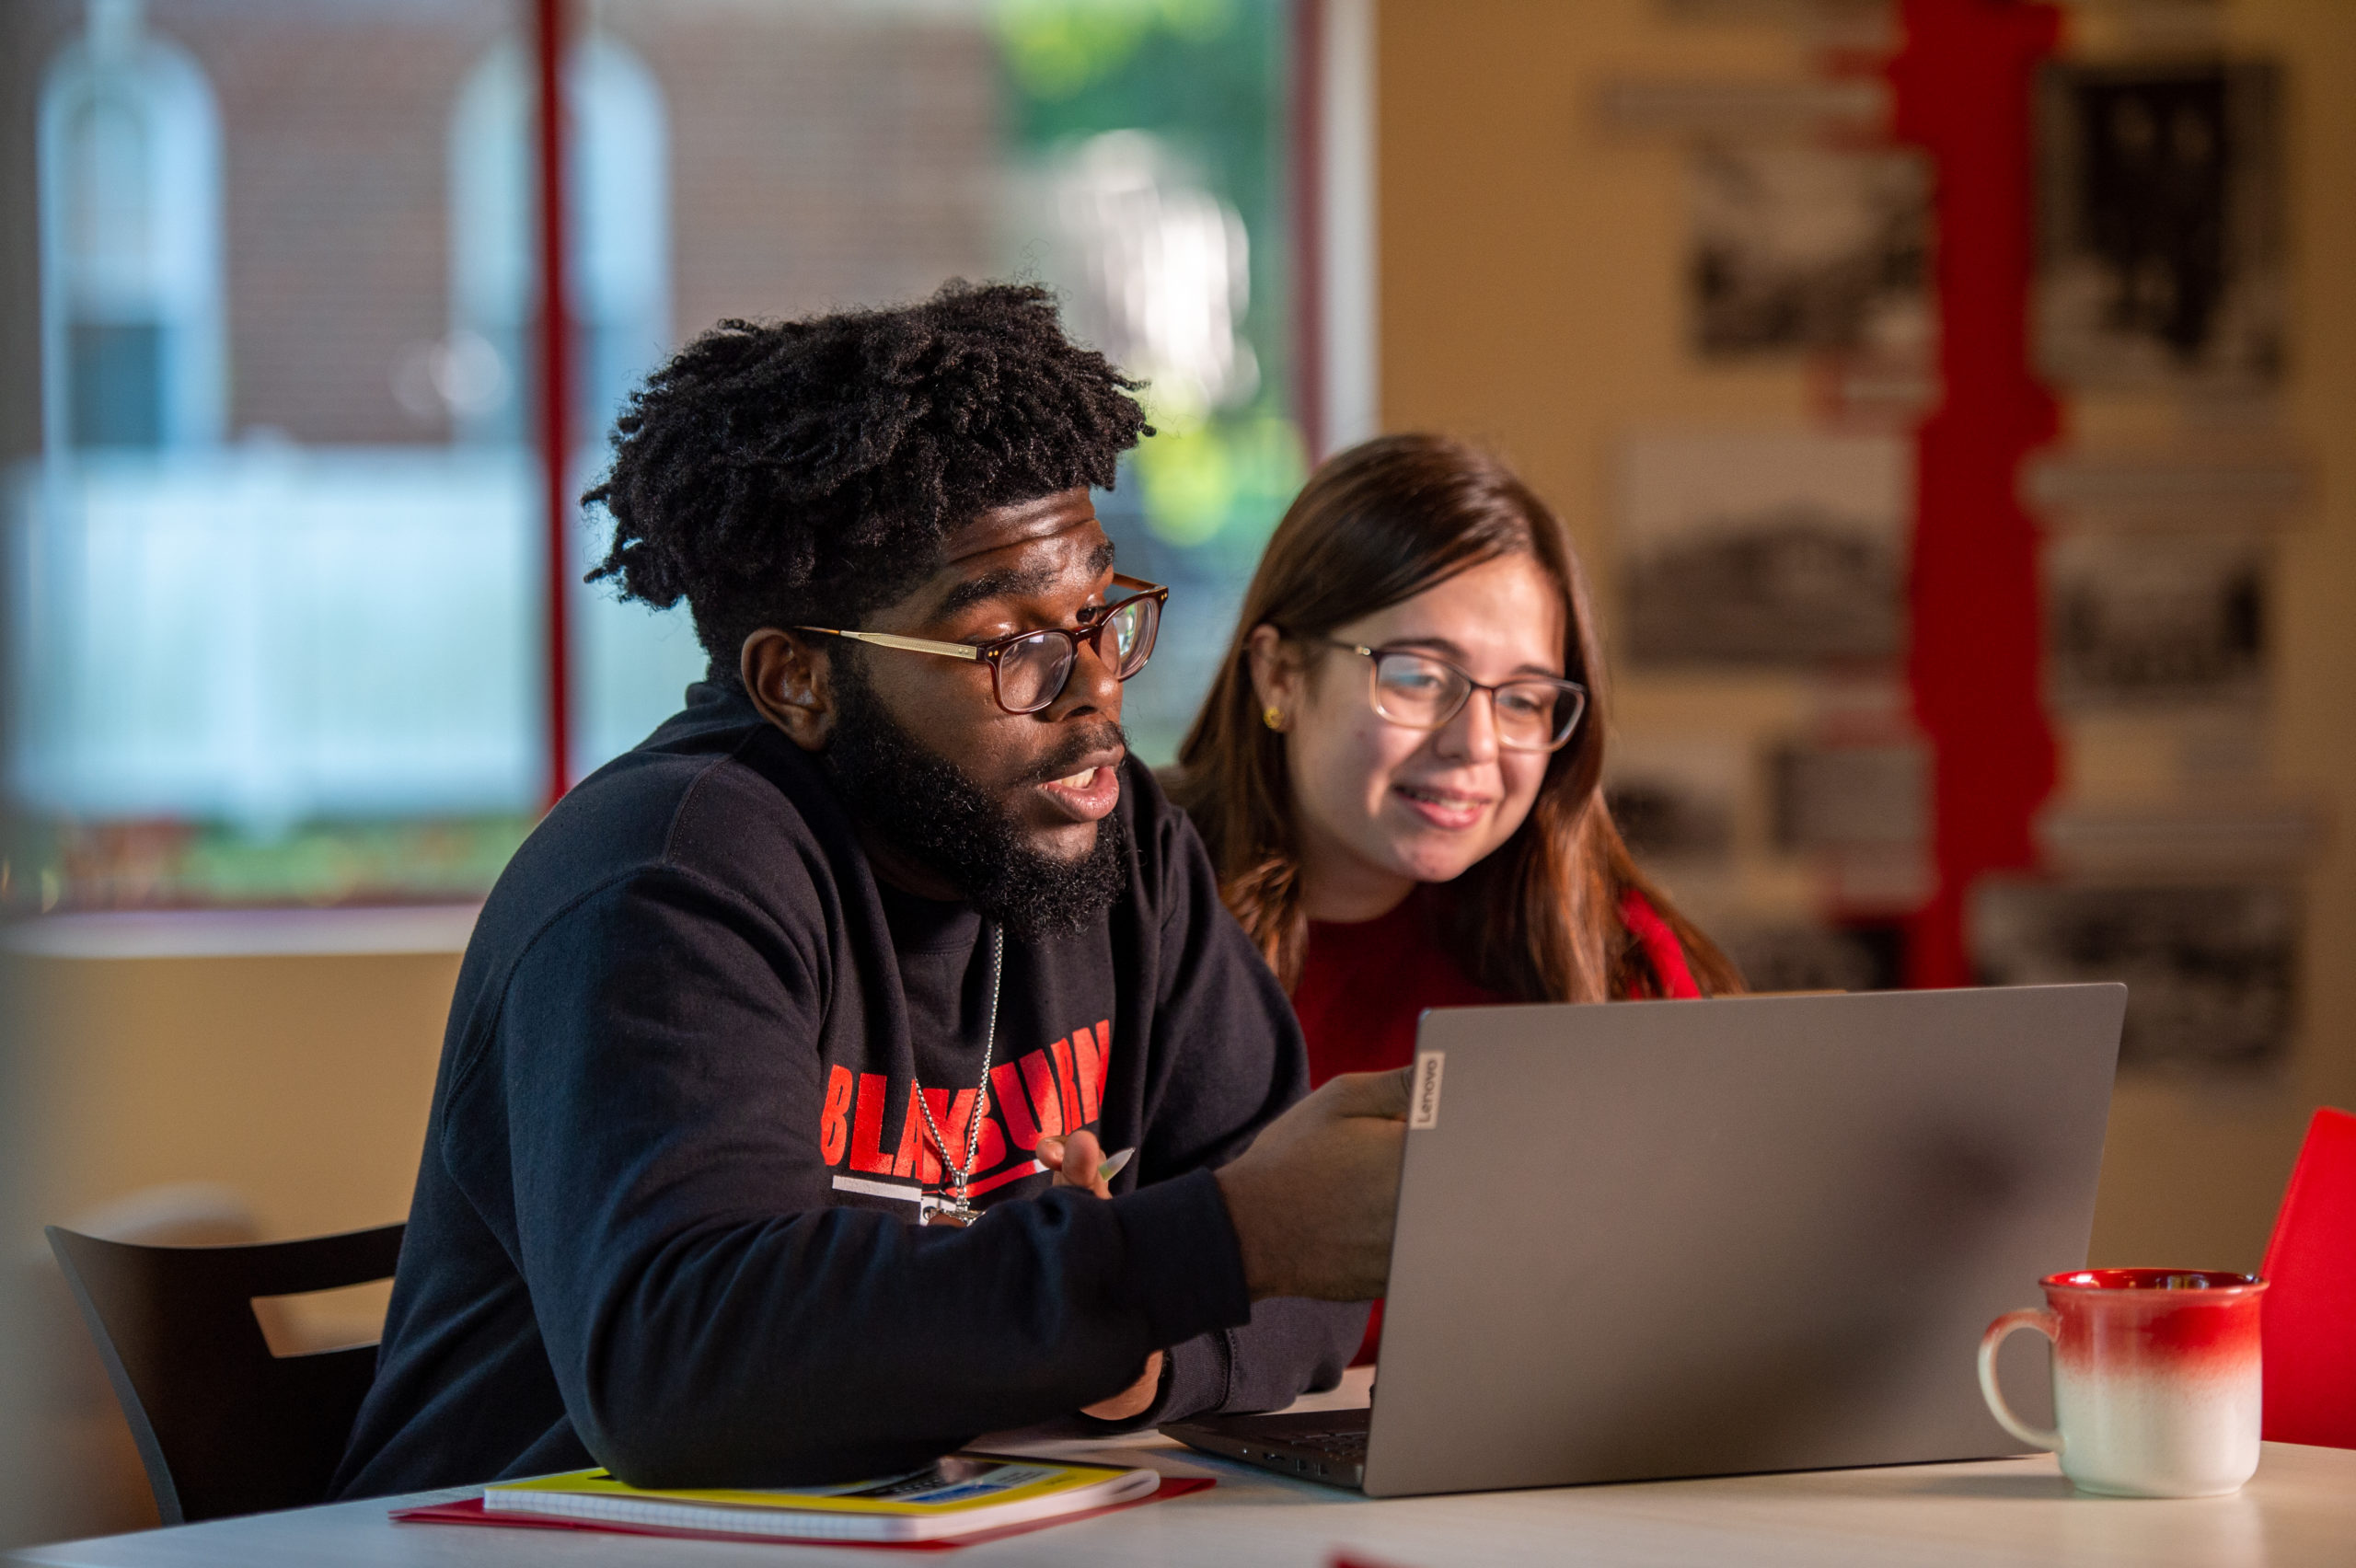 Two students sitting together and reviewing the contents of a laptop at the Jaenke Alumni Center.